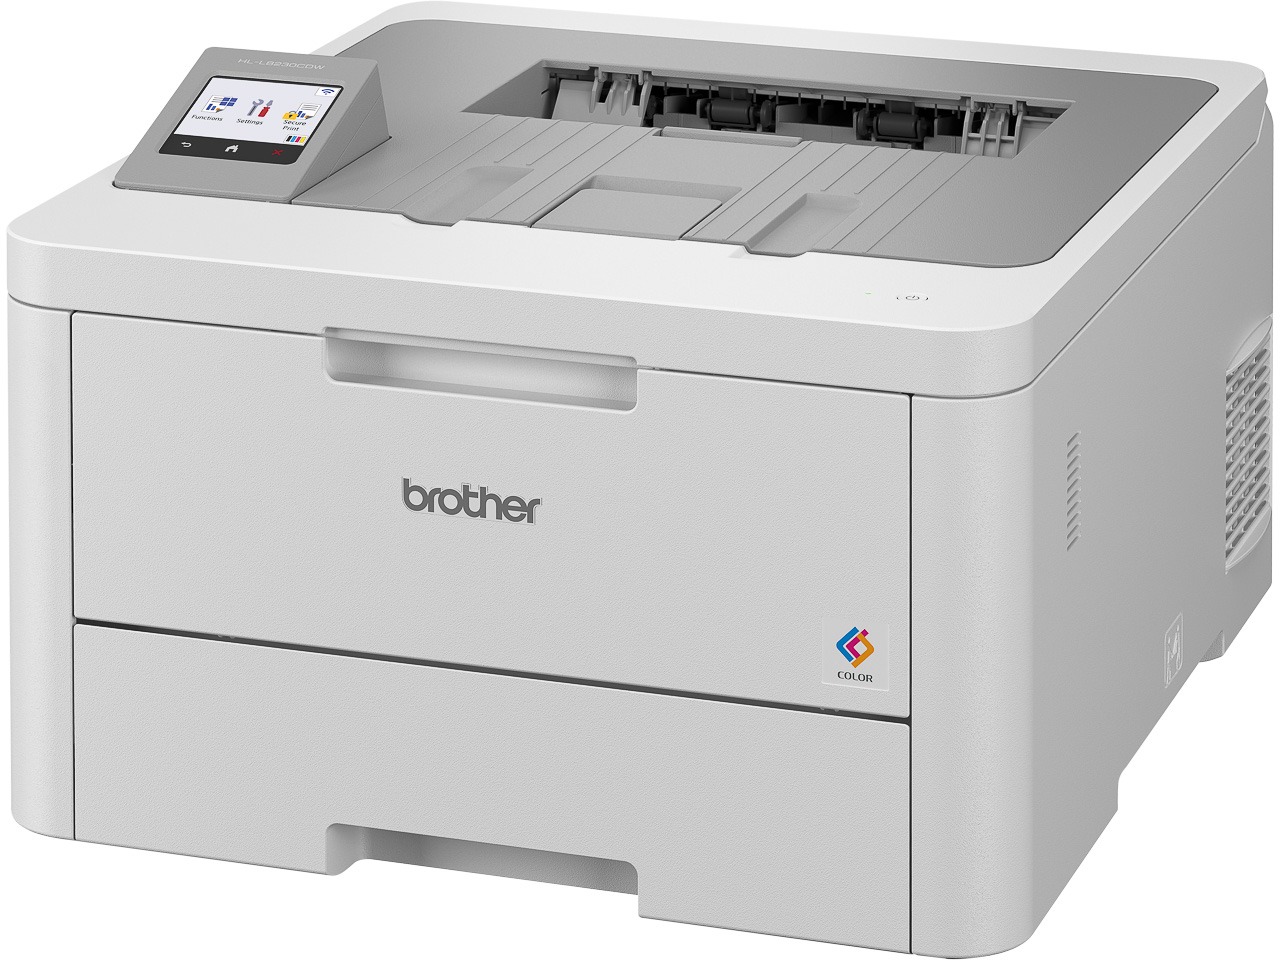 HLL8230CDWRE1 BROTHER HLL8230CDW LED Printer color A4 WiFi Duplex 1